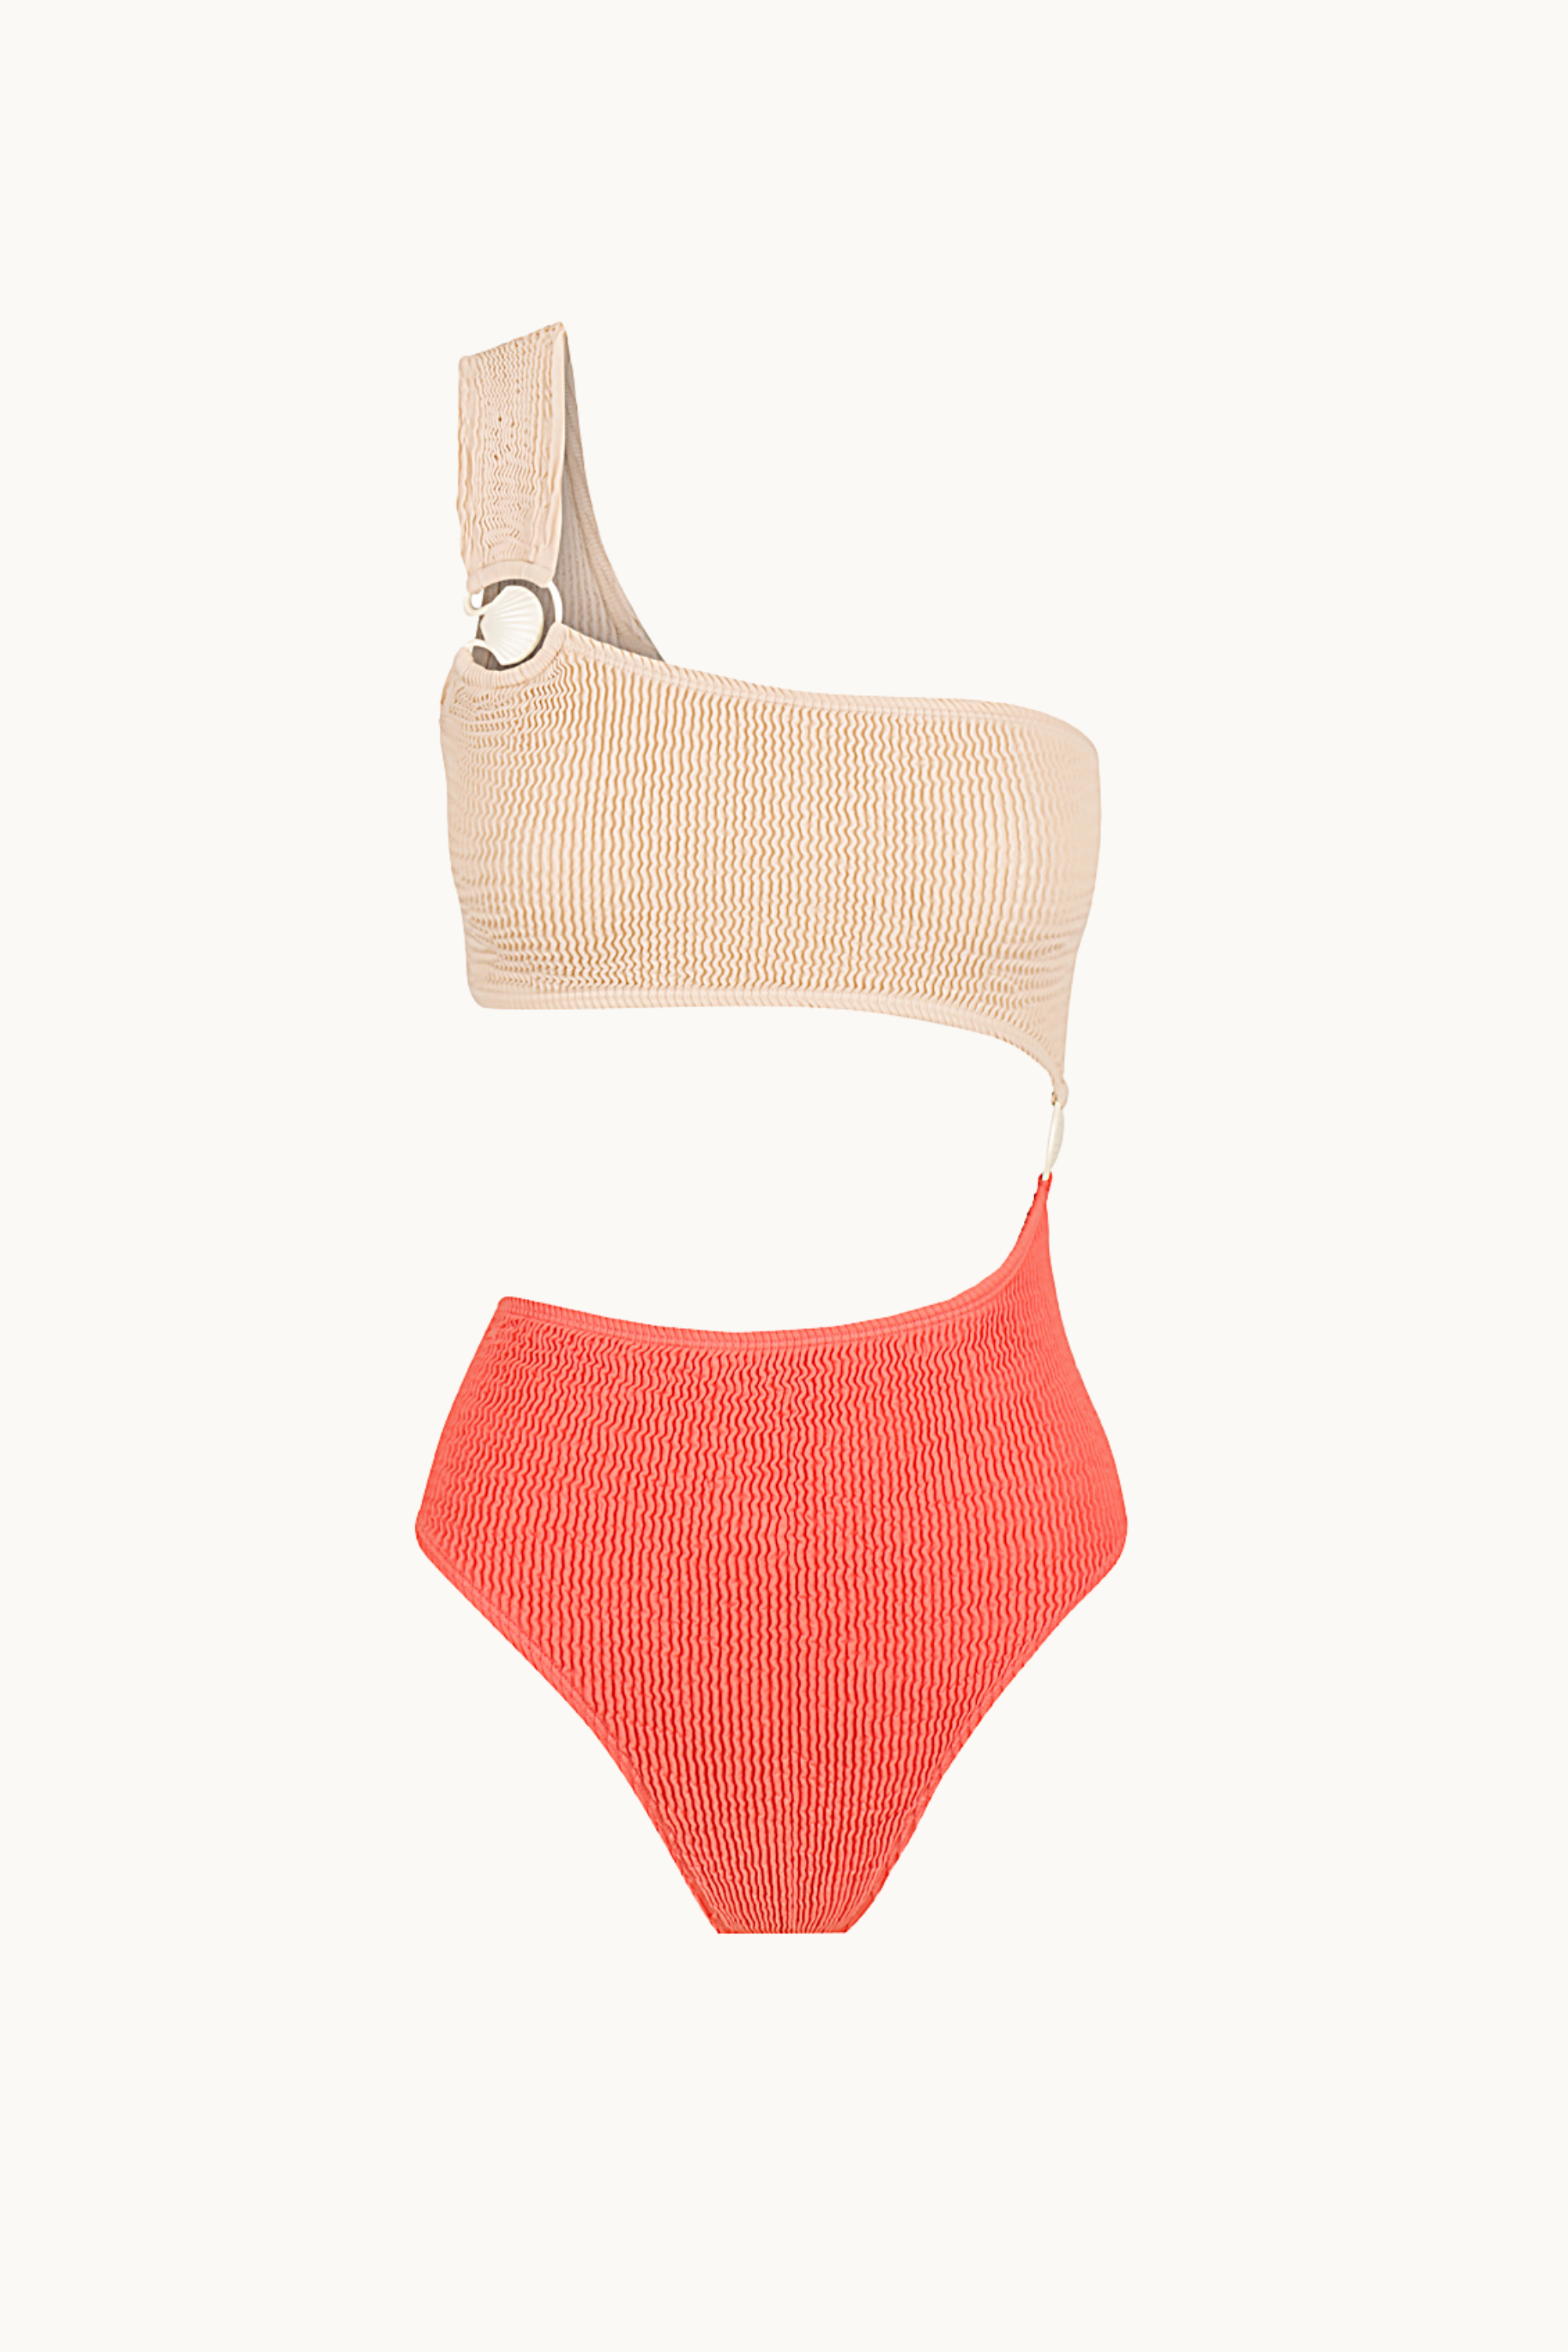 SCALLOP MAILLOT CORAL AND SHELL